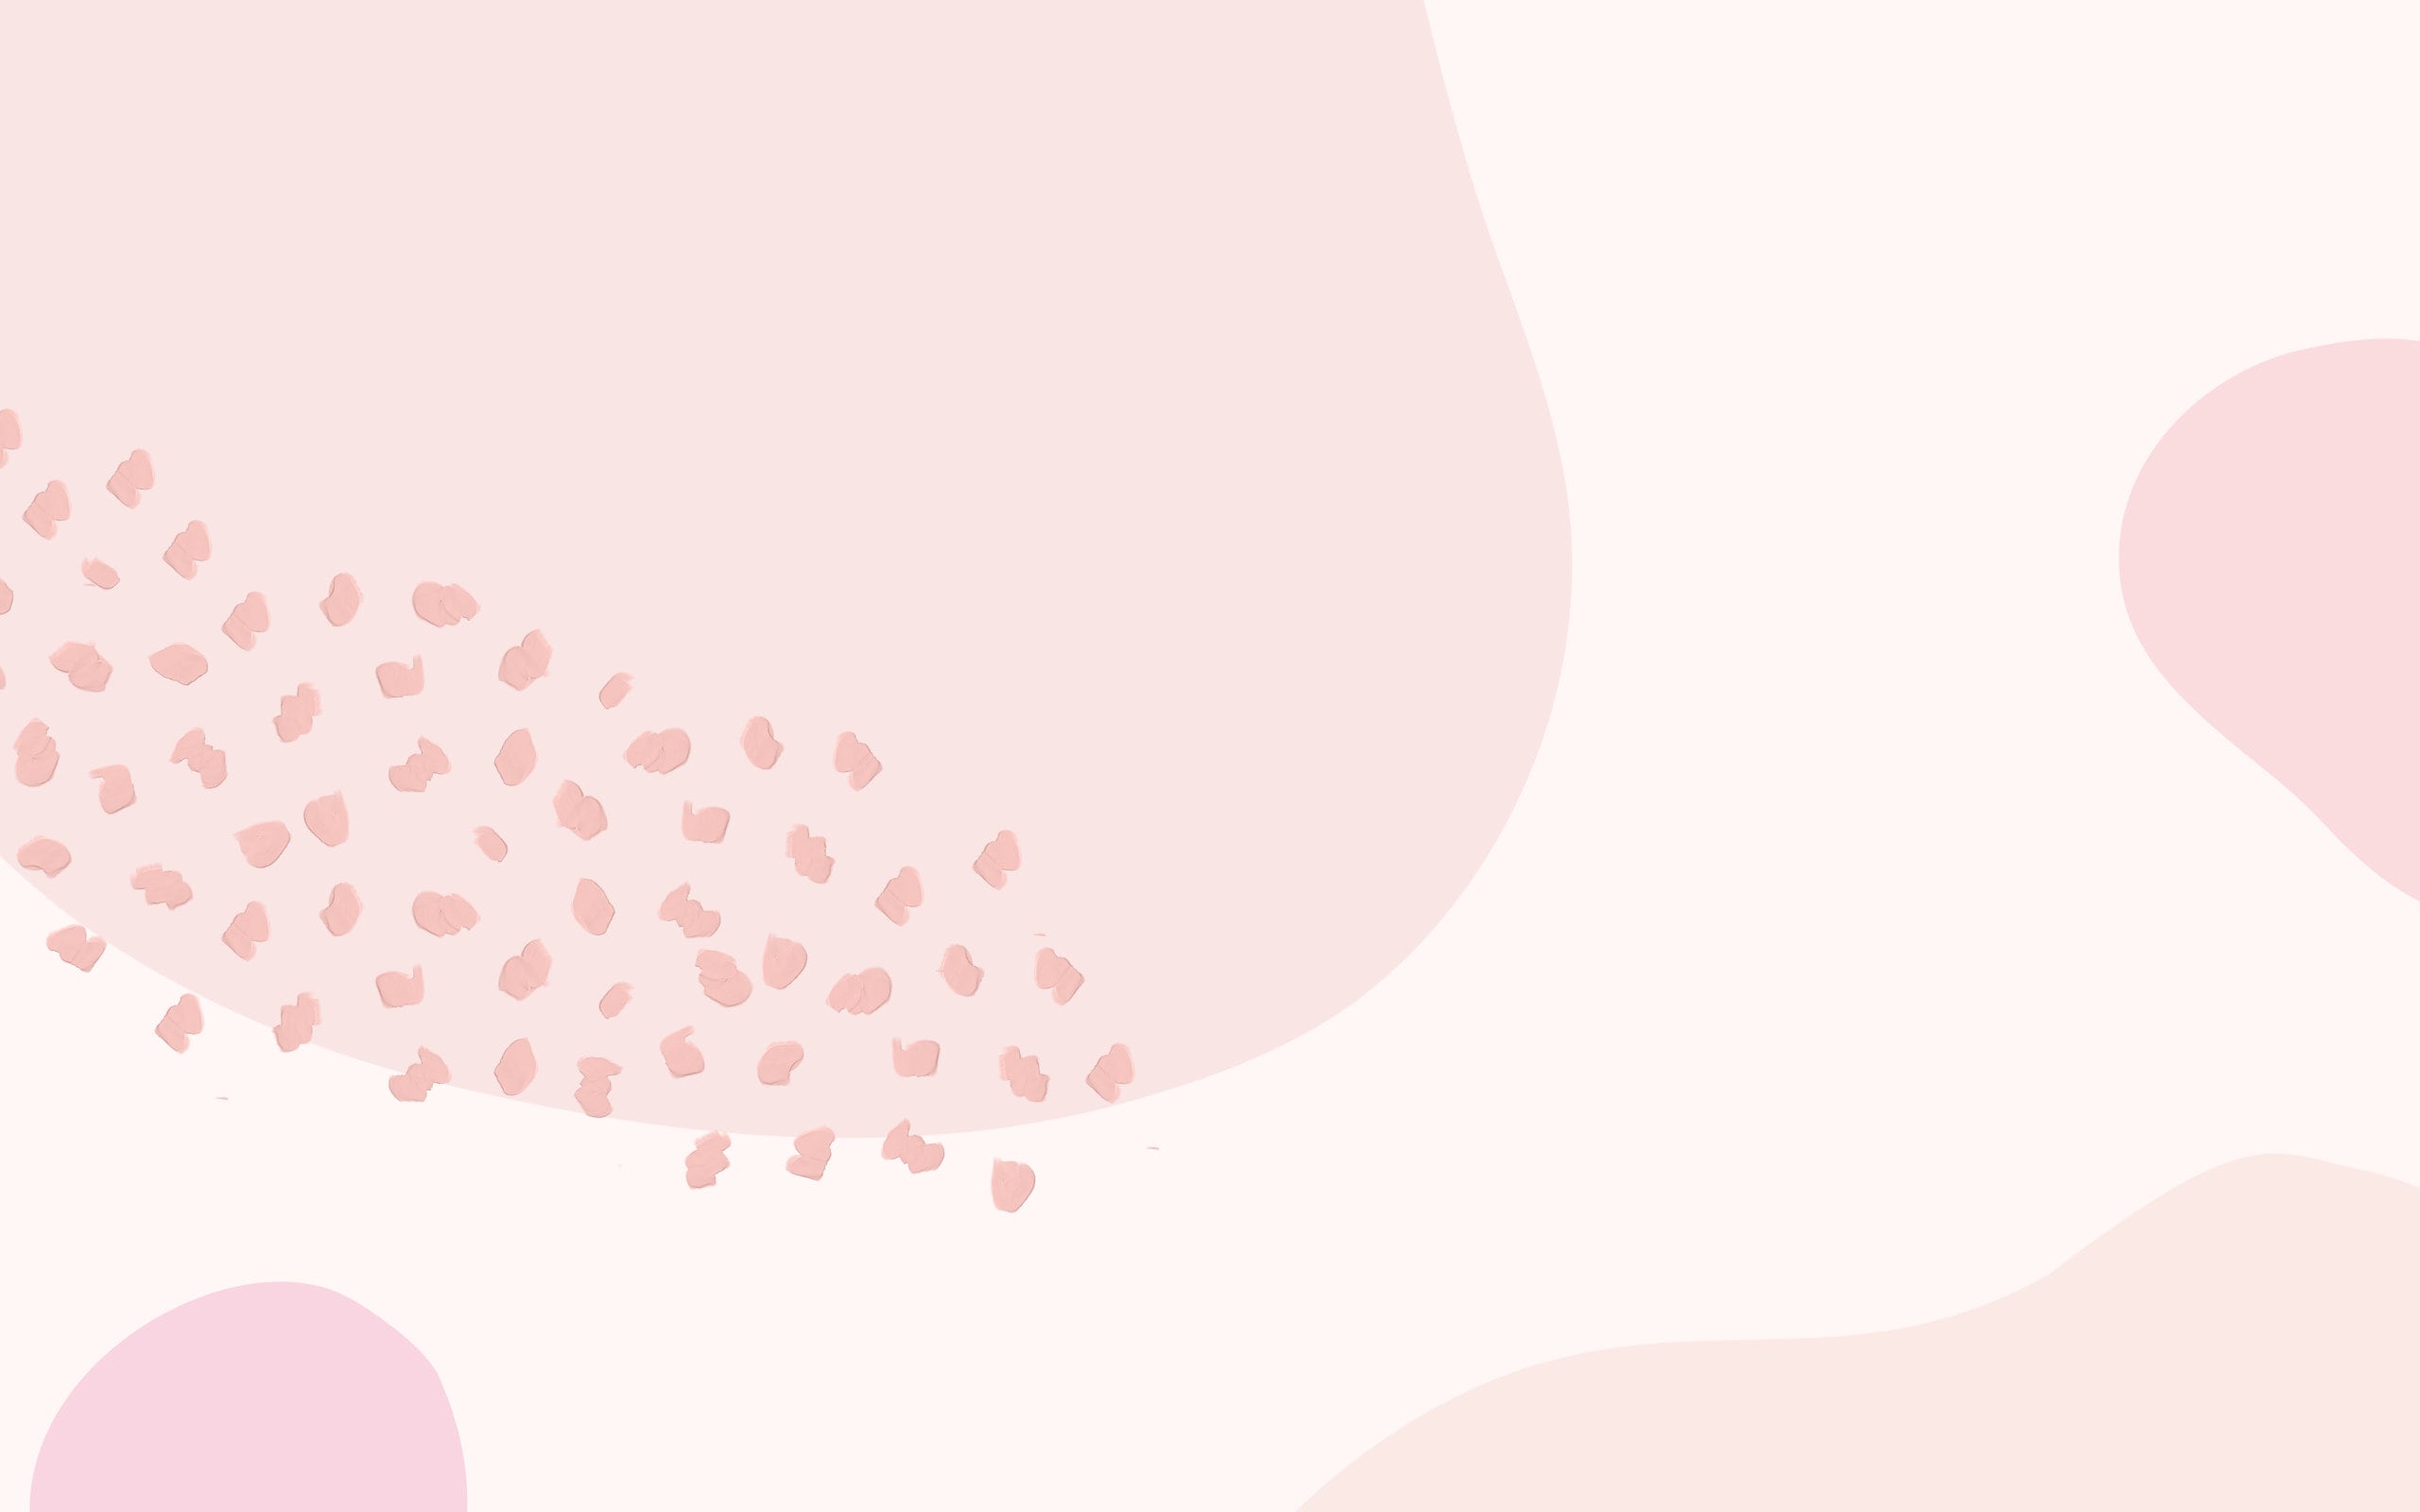 A pastel pink background with irregular spots of the same color. - Pastel minimalist